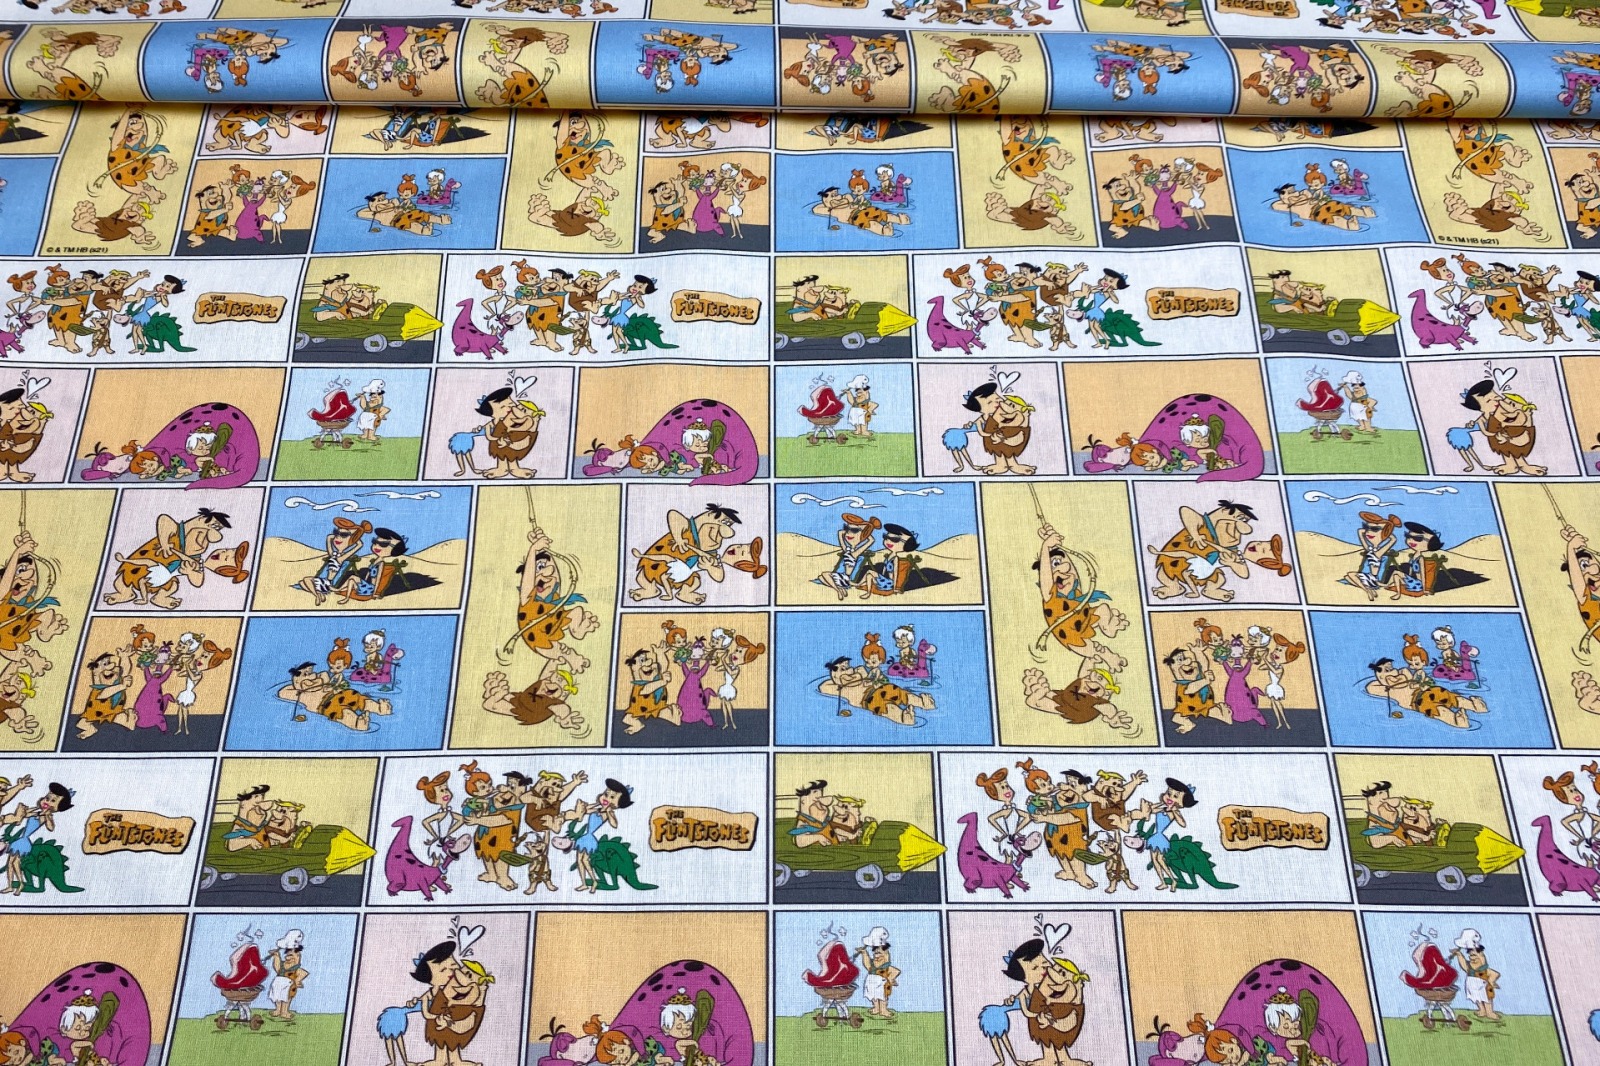 Familie Feuerstein Comic Stoff - 1300 EUR/m - Fred - Wilma - Barney - Betty - BamBam - Pebbles -